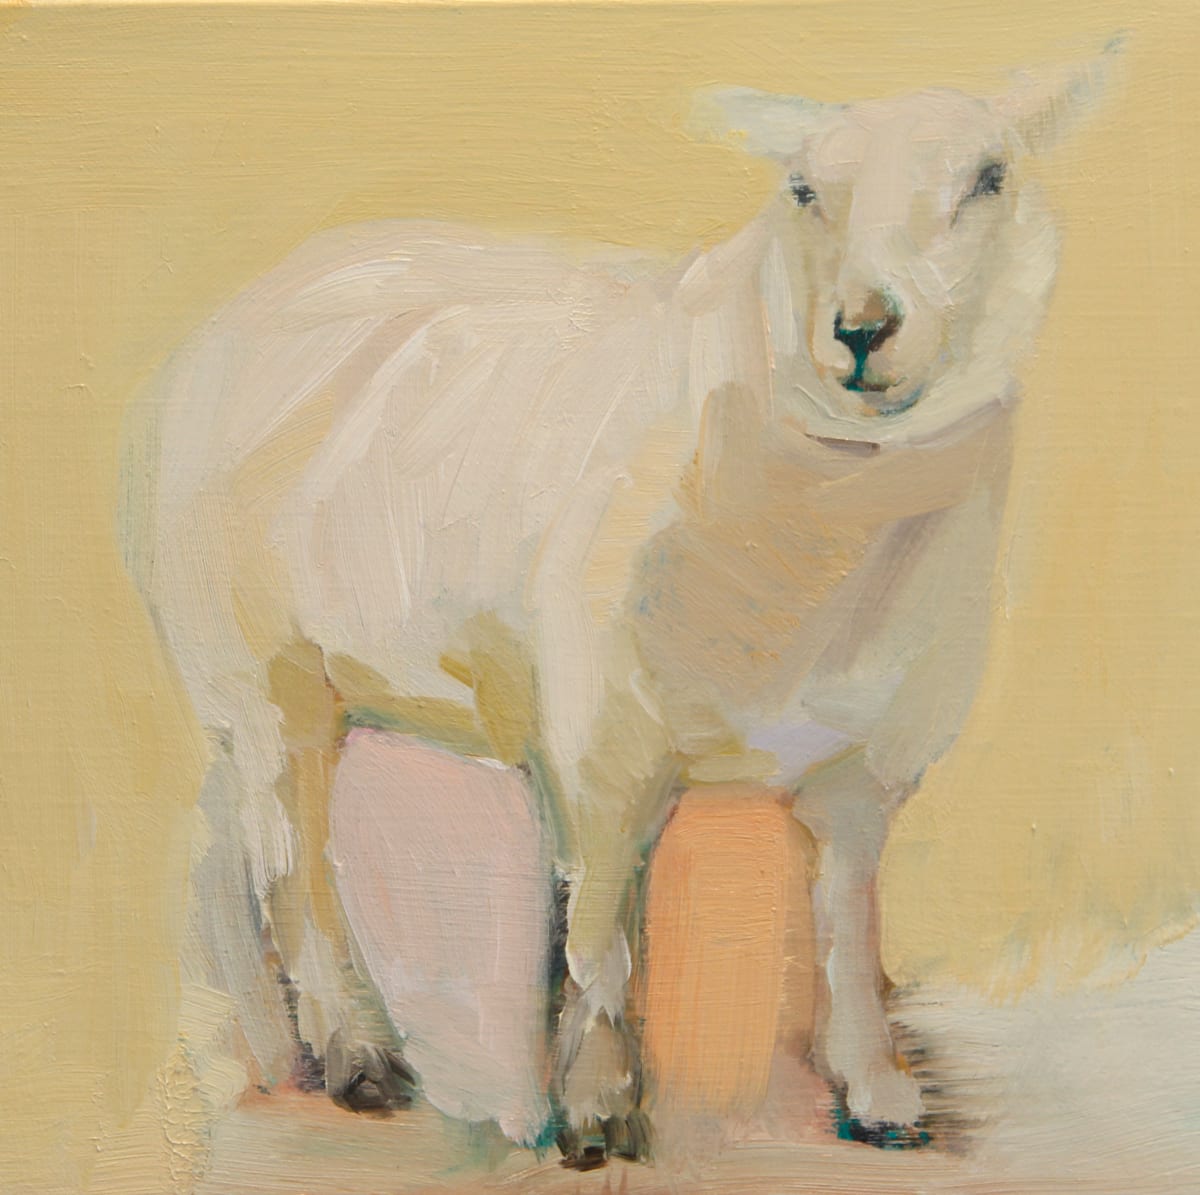 Lamb in Lighter Shade of Pale by Claudia Pettis 